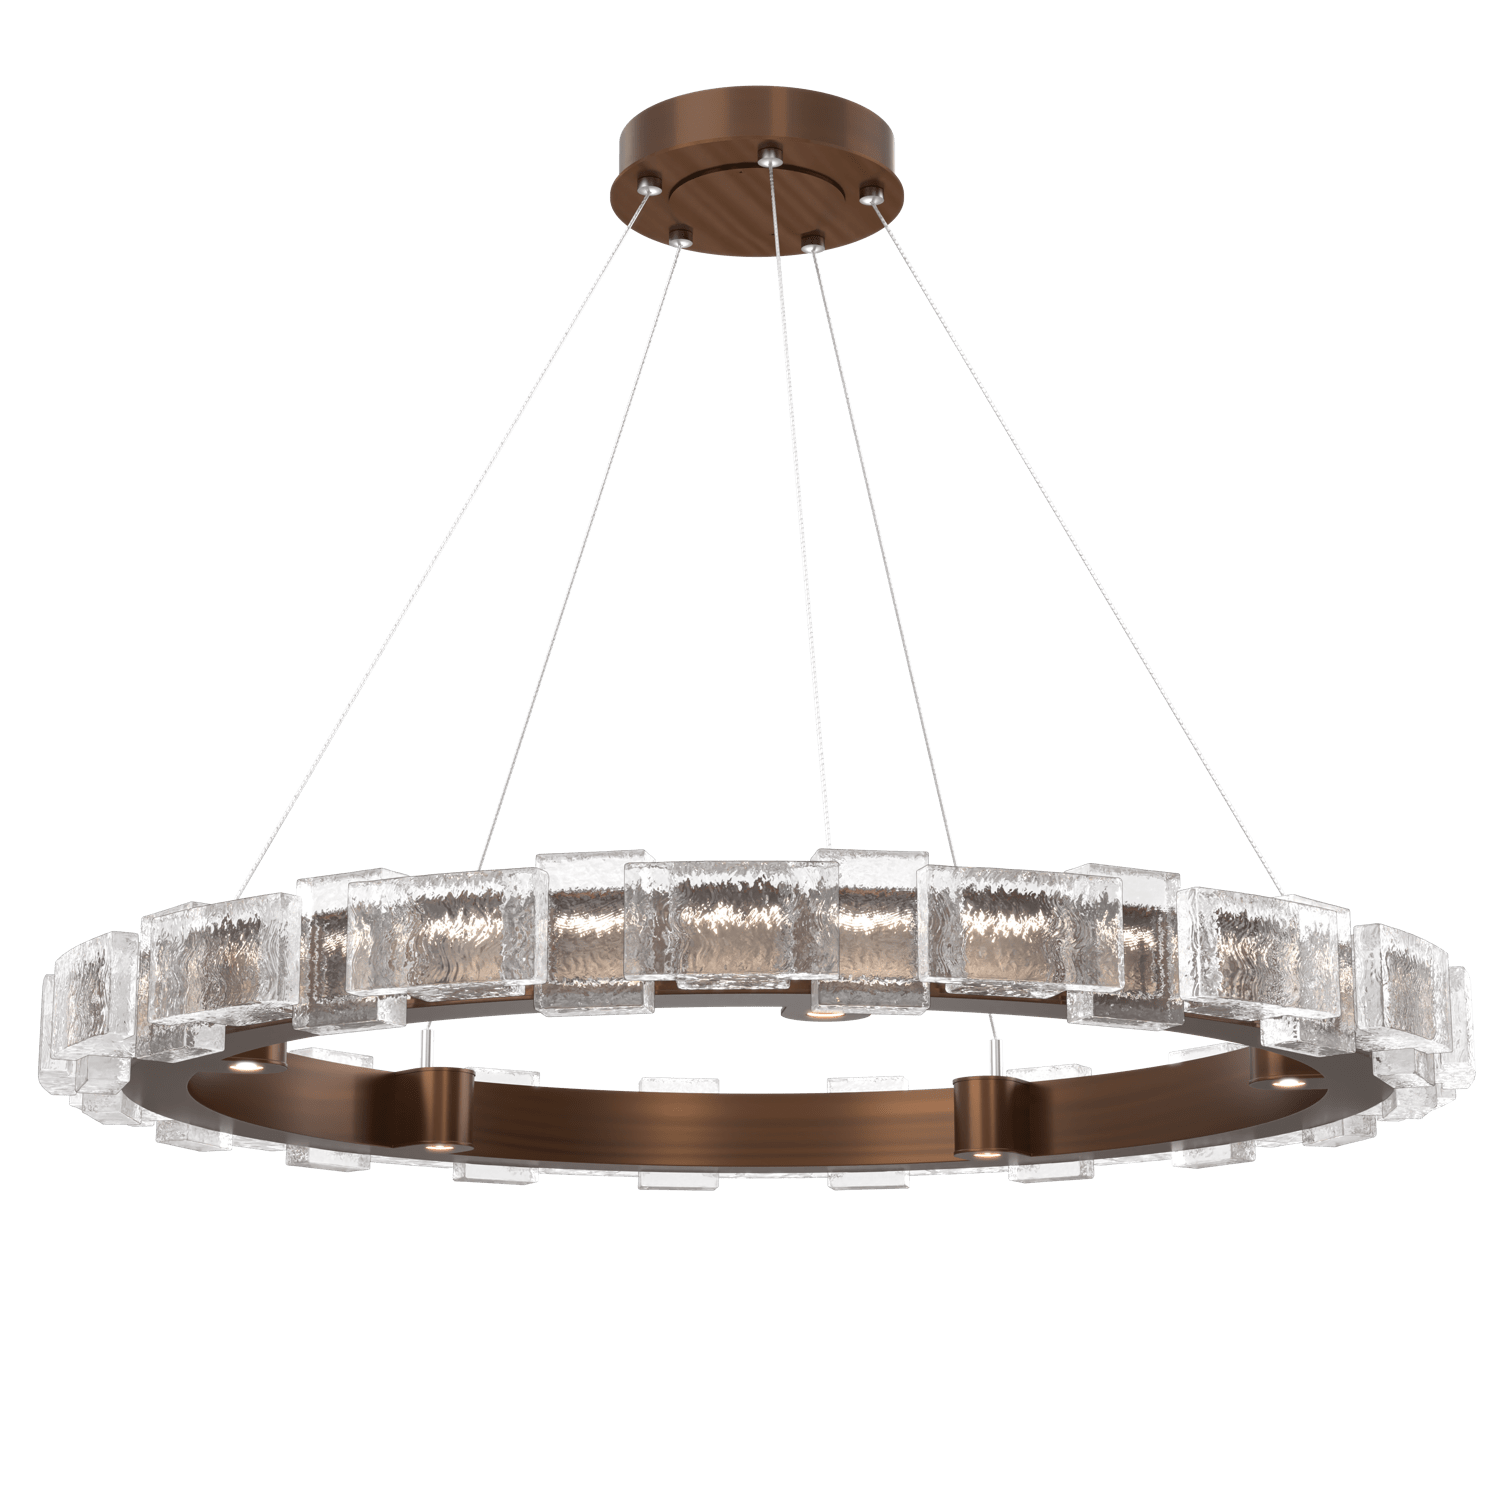 CHB0087-38-RB-TE-Hammerton-Studio-Tessera-38-inch-ring-chandelier-with-oil-rubbed-bronze-finish-and-clear-tetro-cast-glass-shade-and-LED-lamping